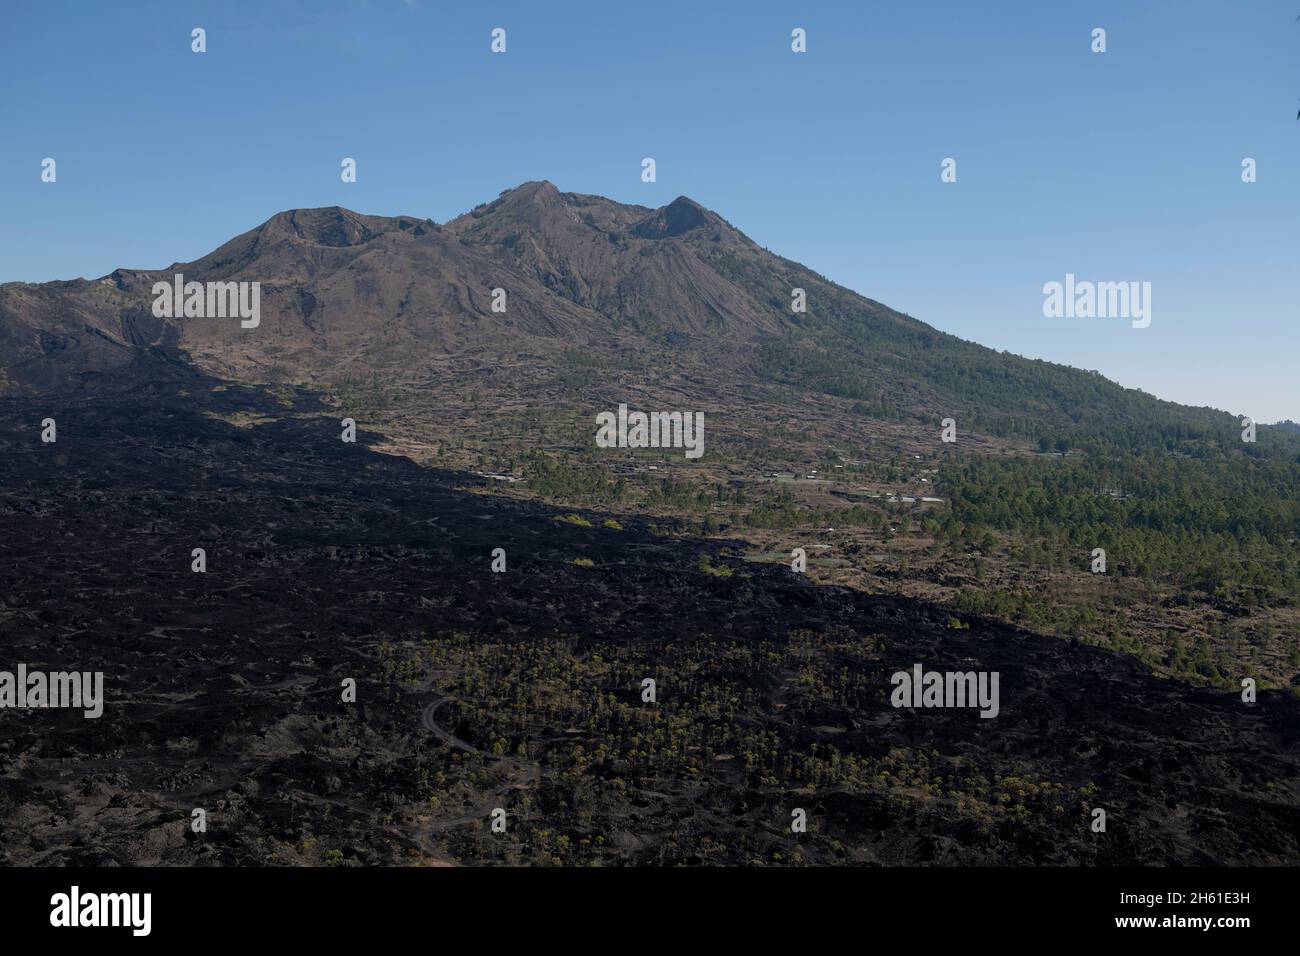 View of calderas and lava flow from 1974, Mount Batur, Bangli Regency, Bali, Indonesia, Asia Stock Photo